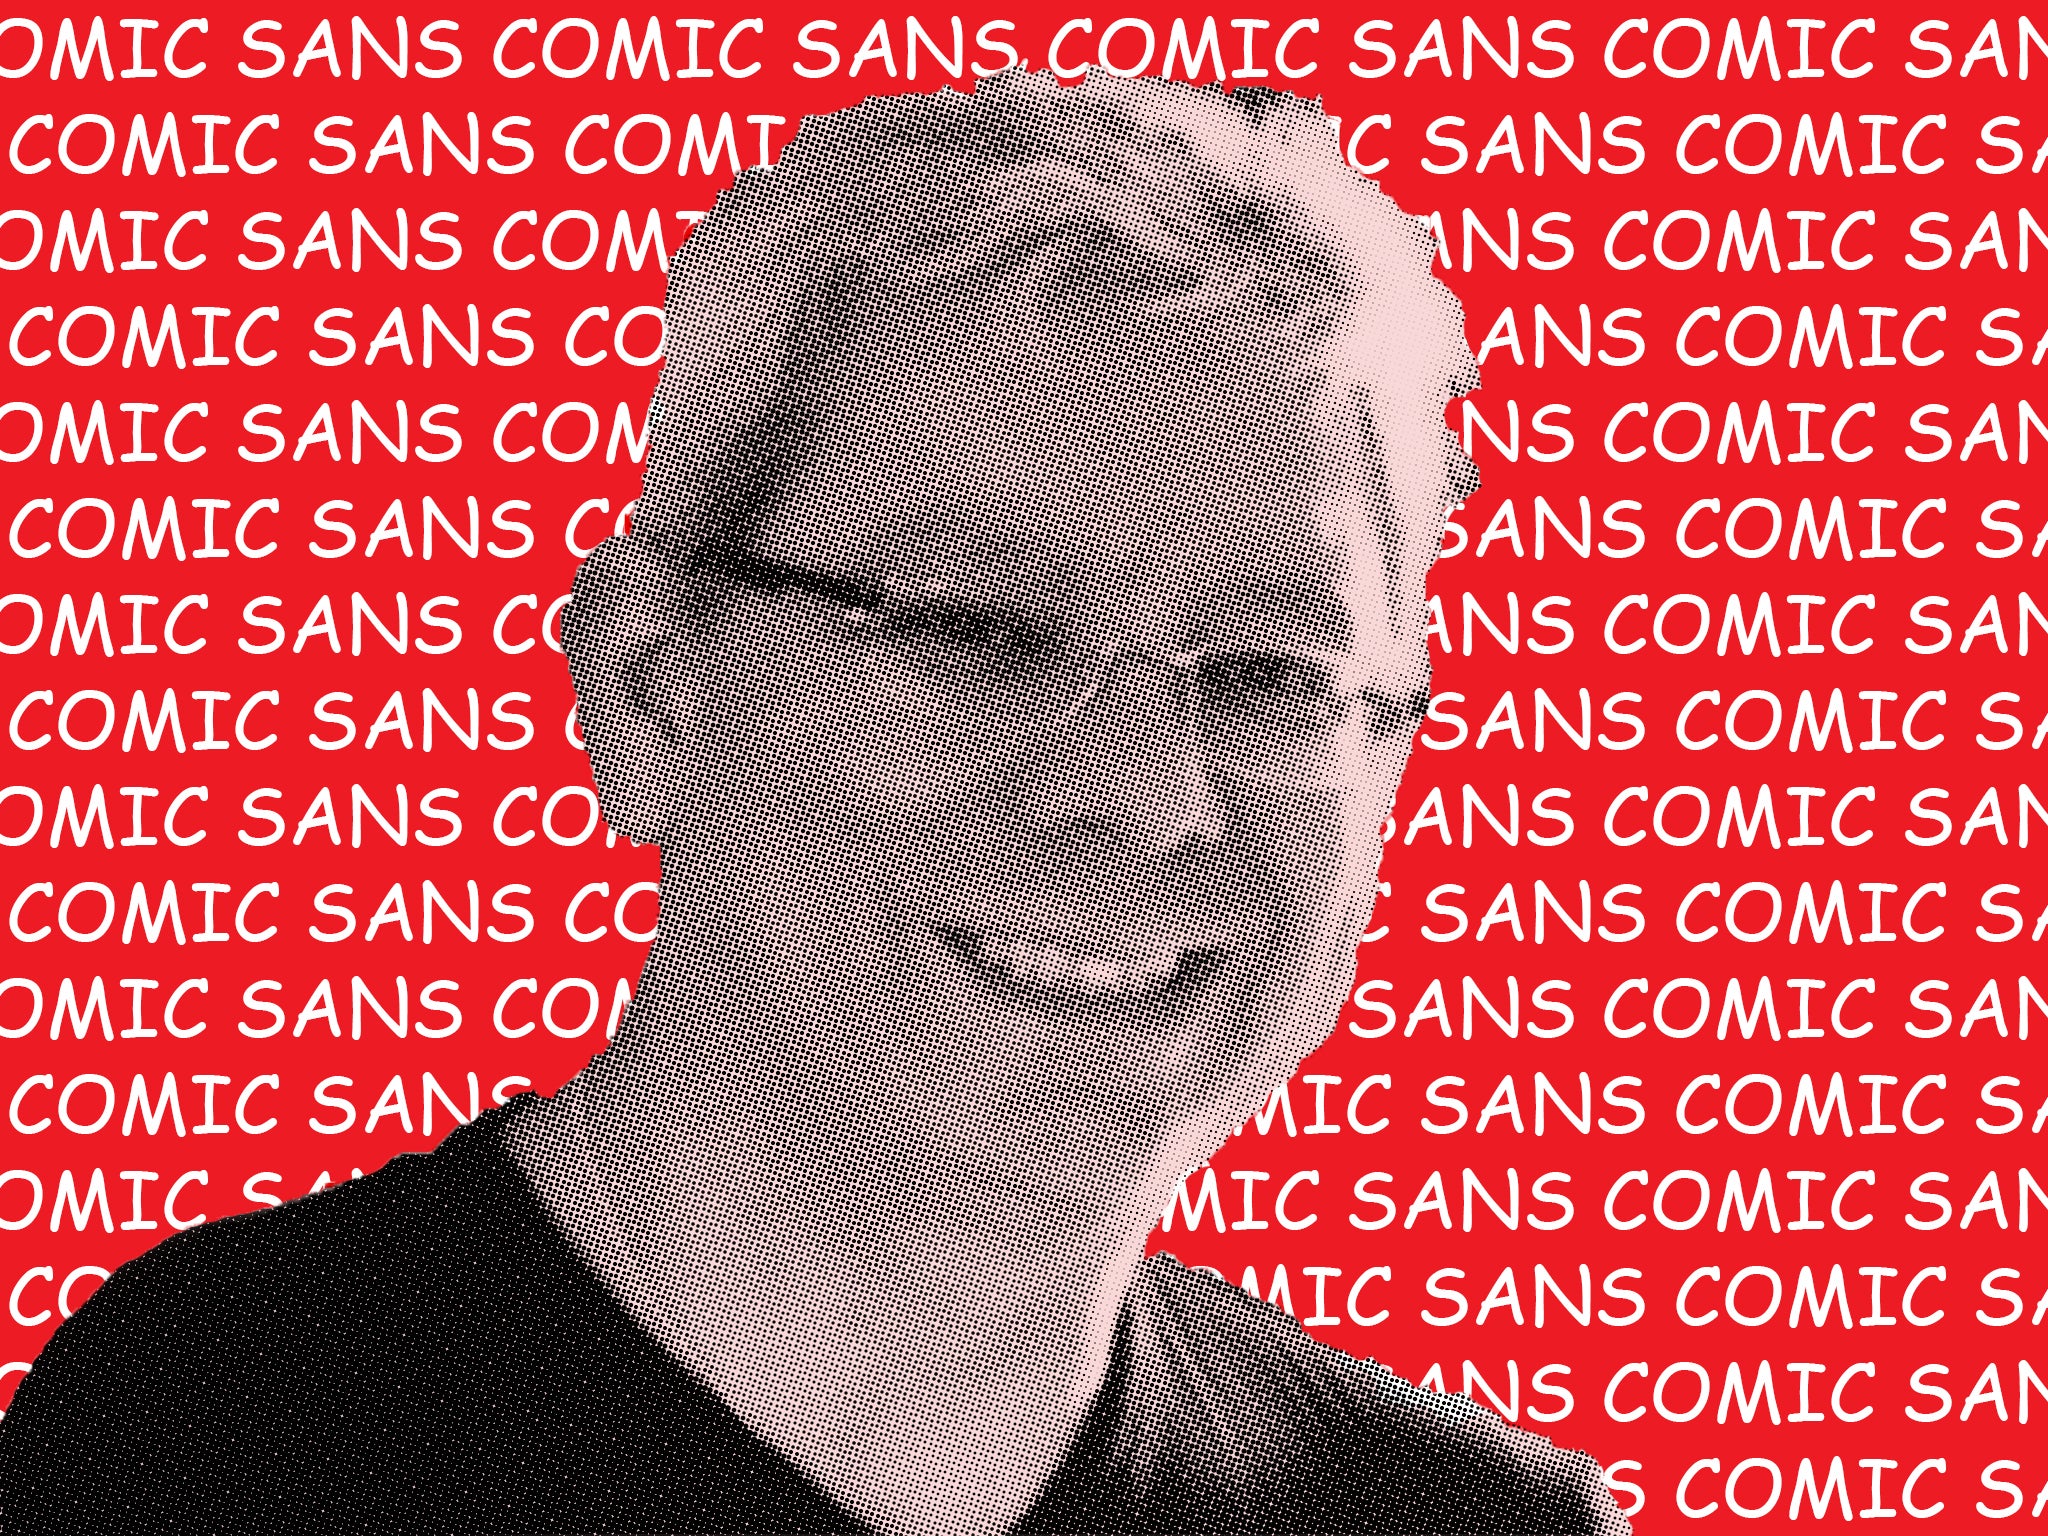 Vincent Connare created the whimsical font in 1994